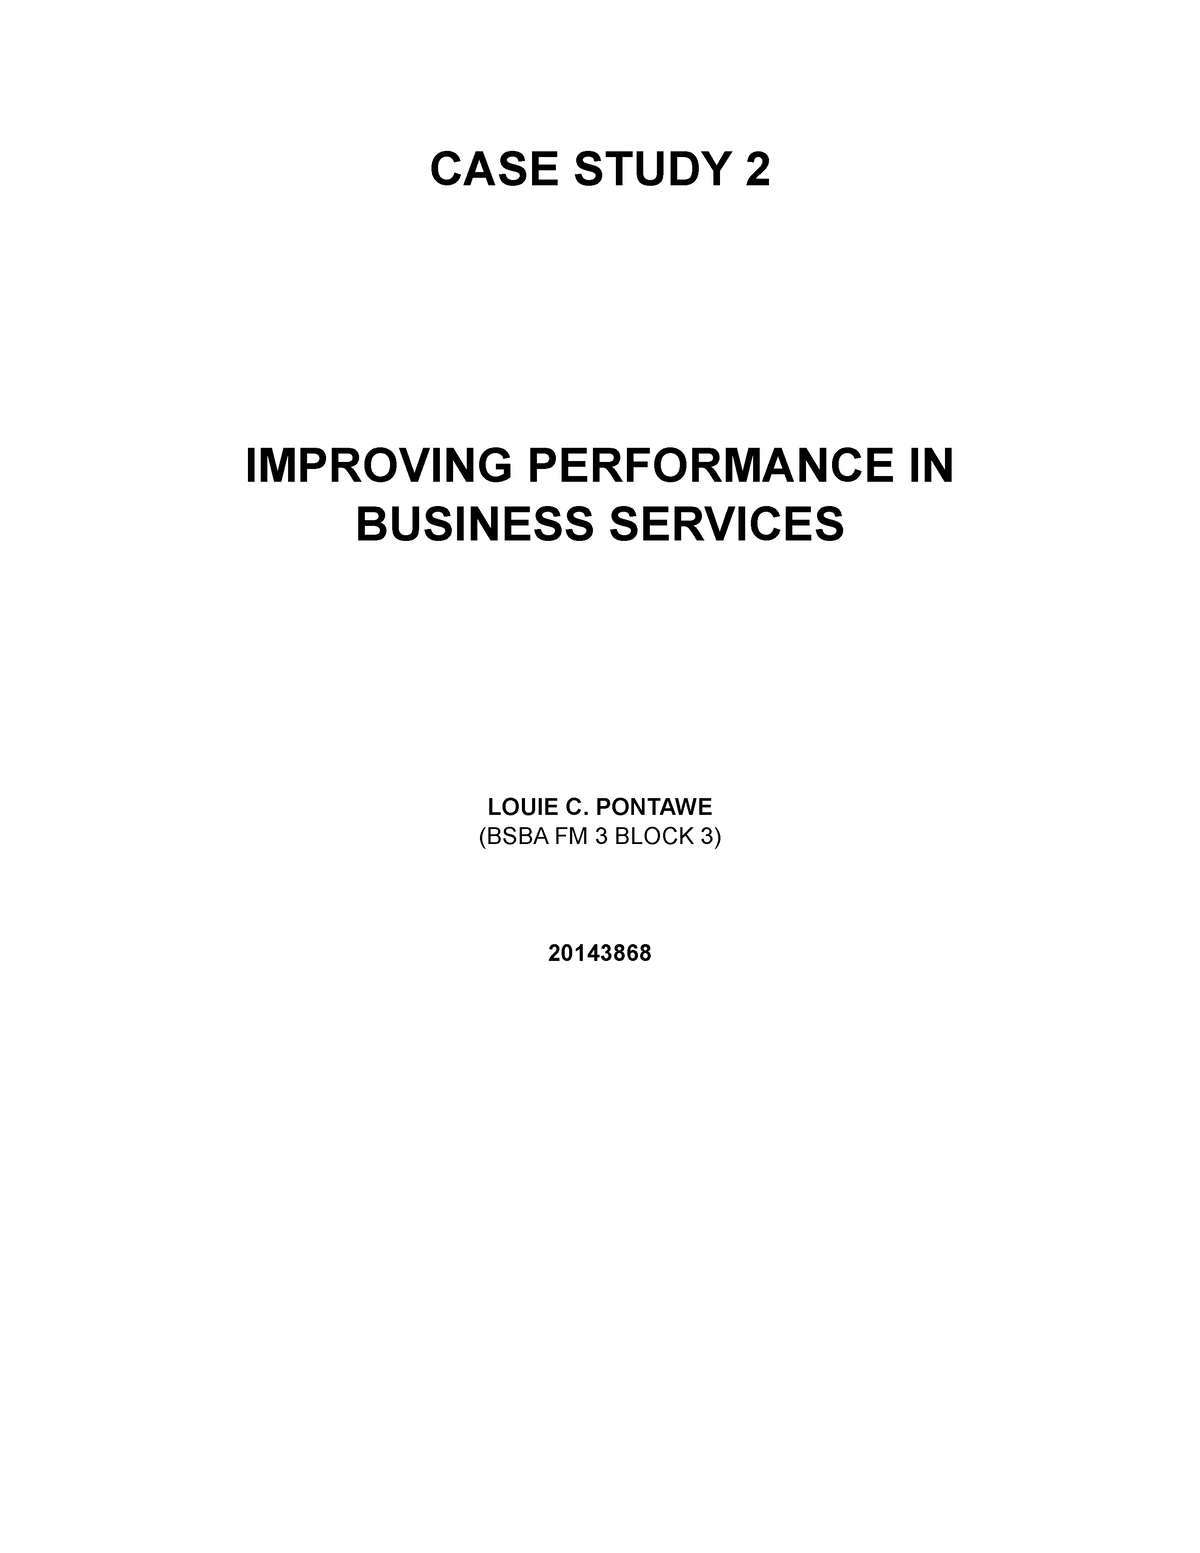 improving performance in business services case study answers